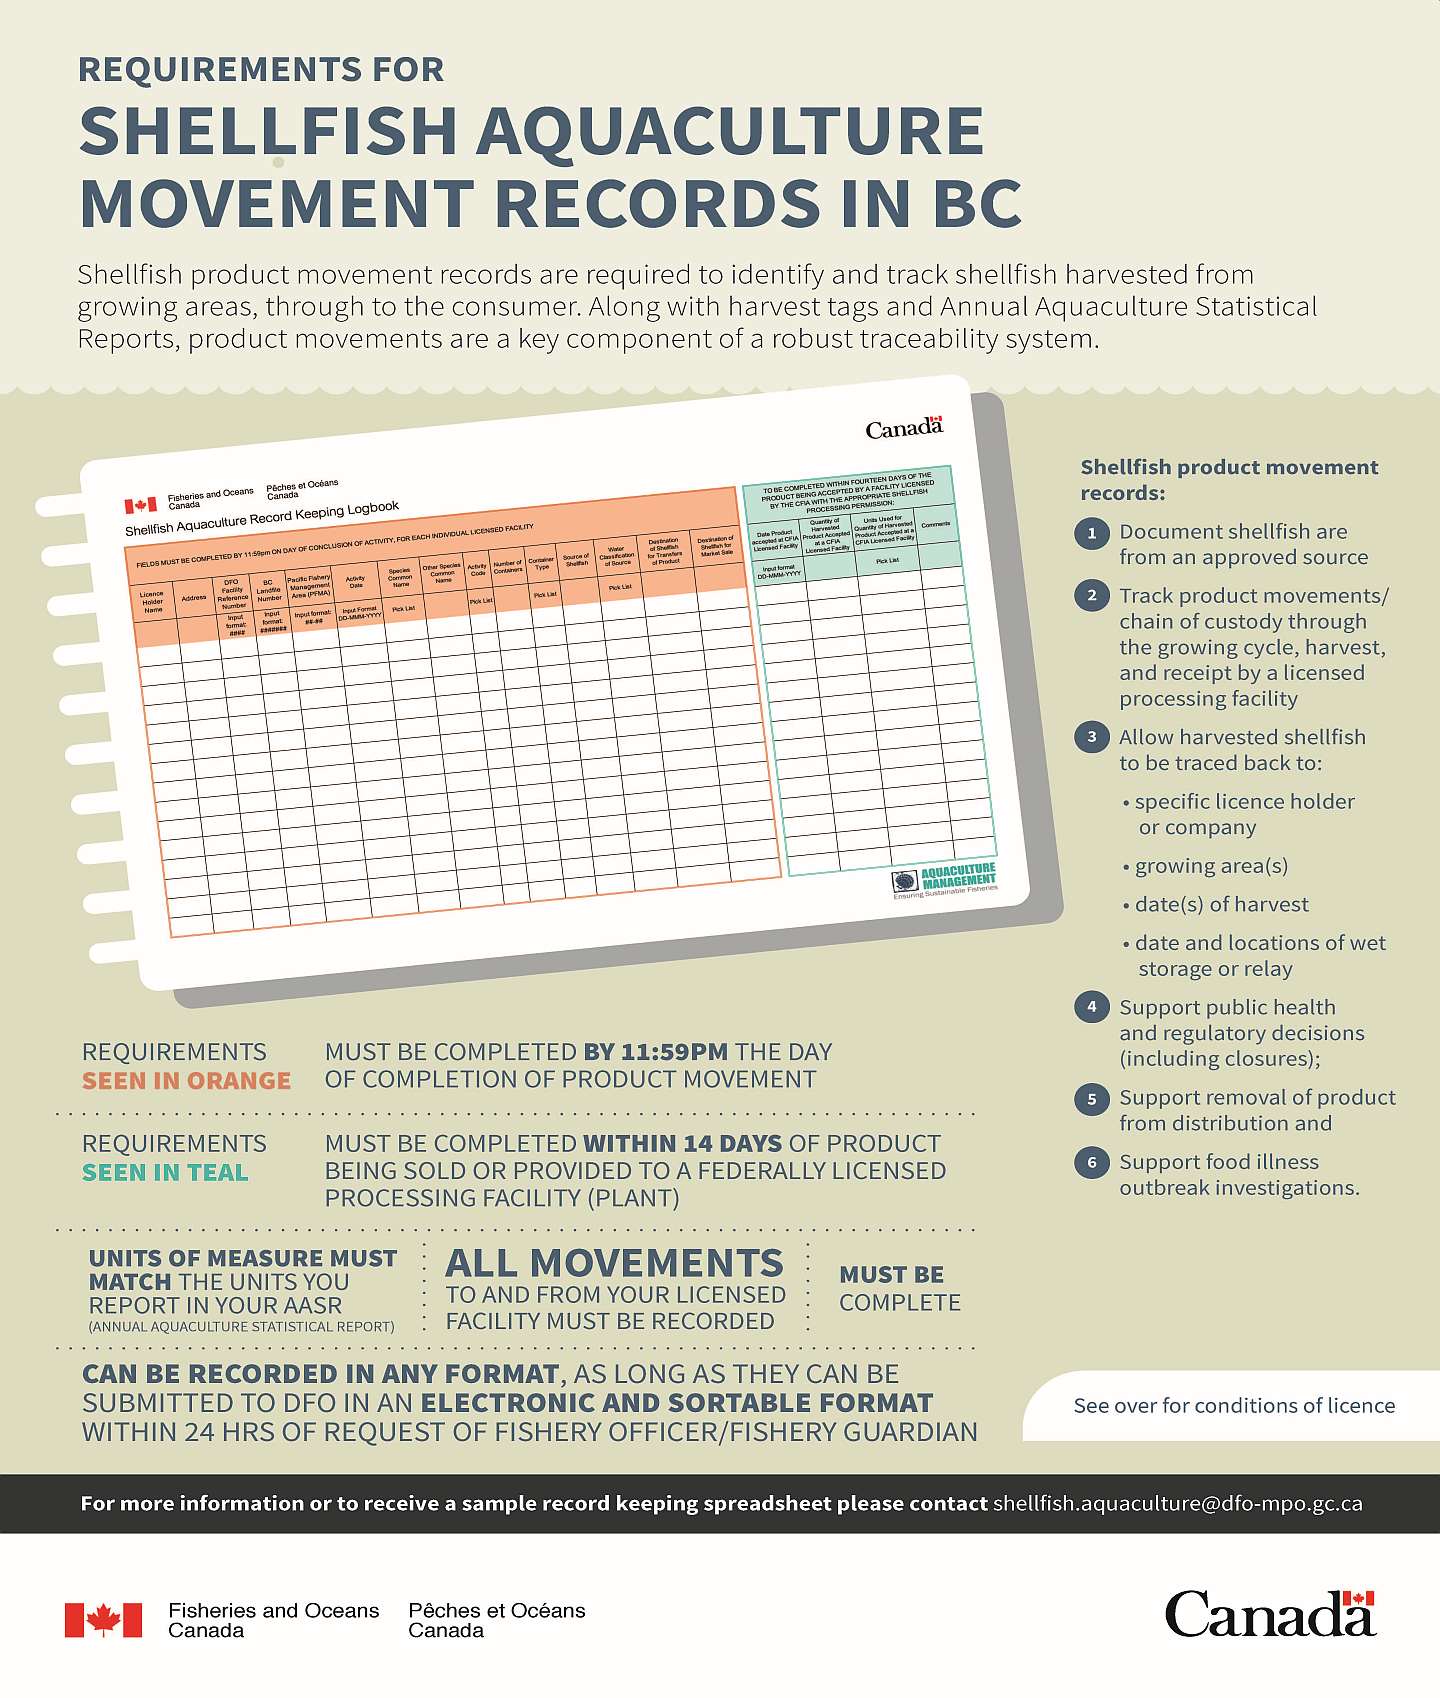 Requirements for shellfish aquaculture movement records in BC